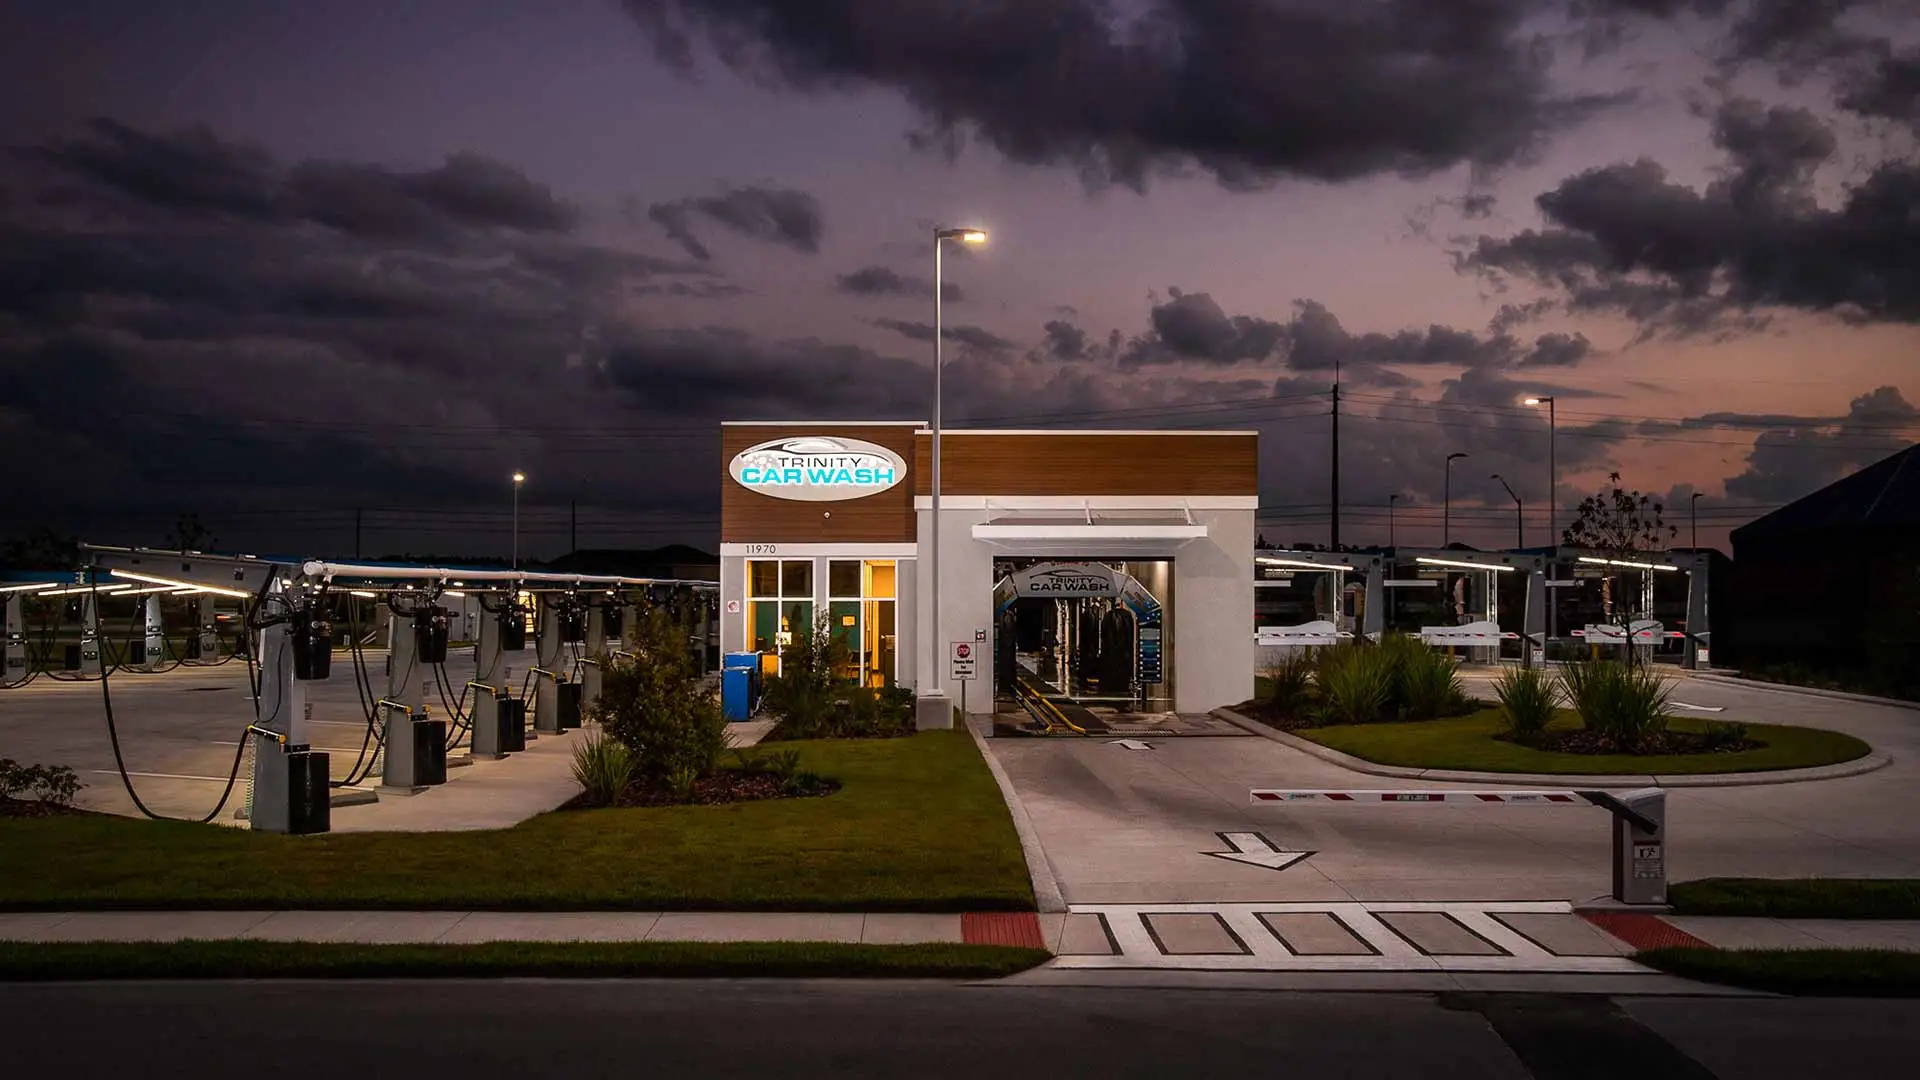 Photo of Trinity Car Wash by Creative Convenience at sunset.